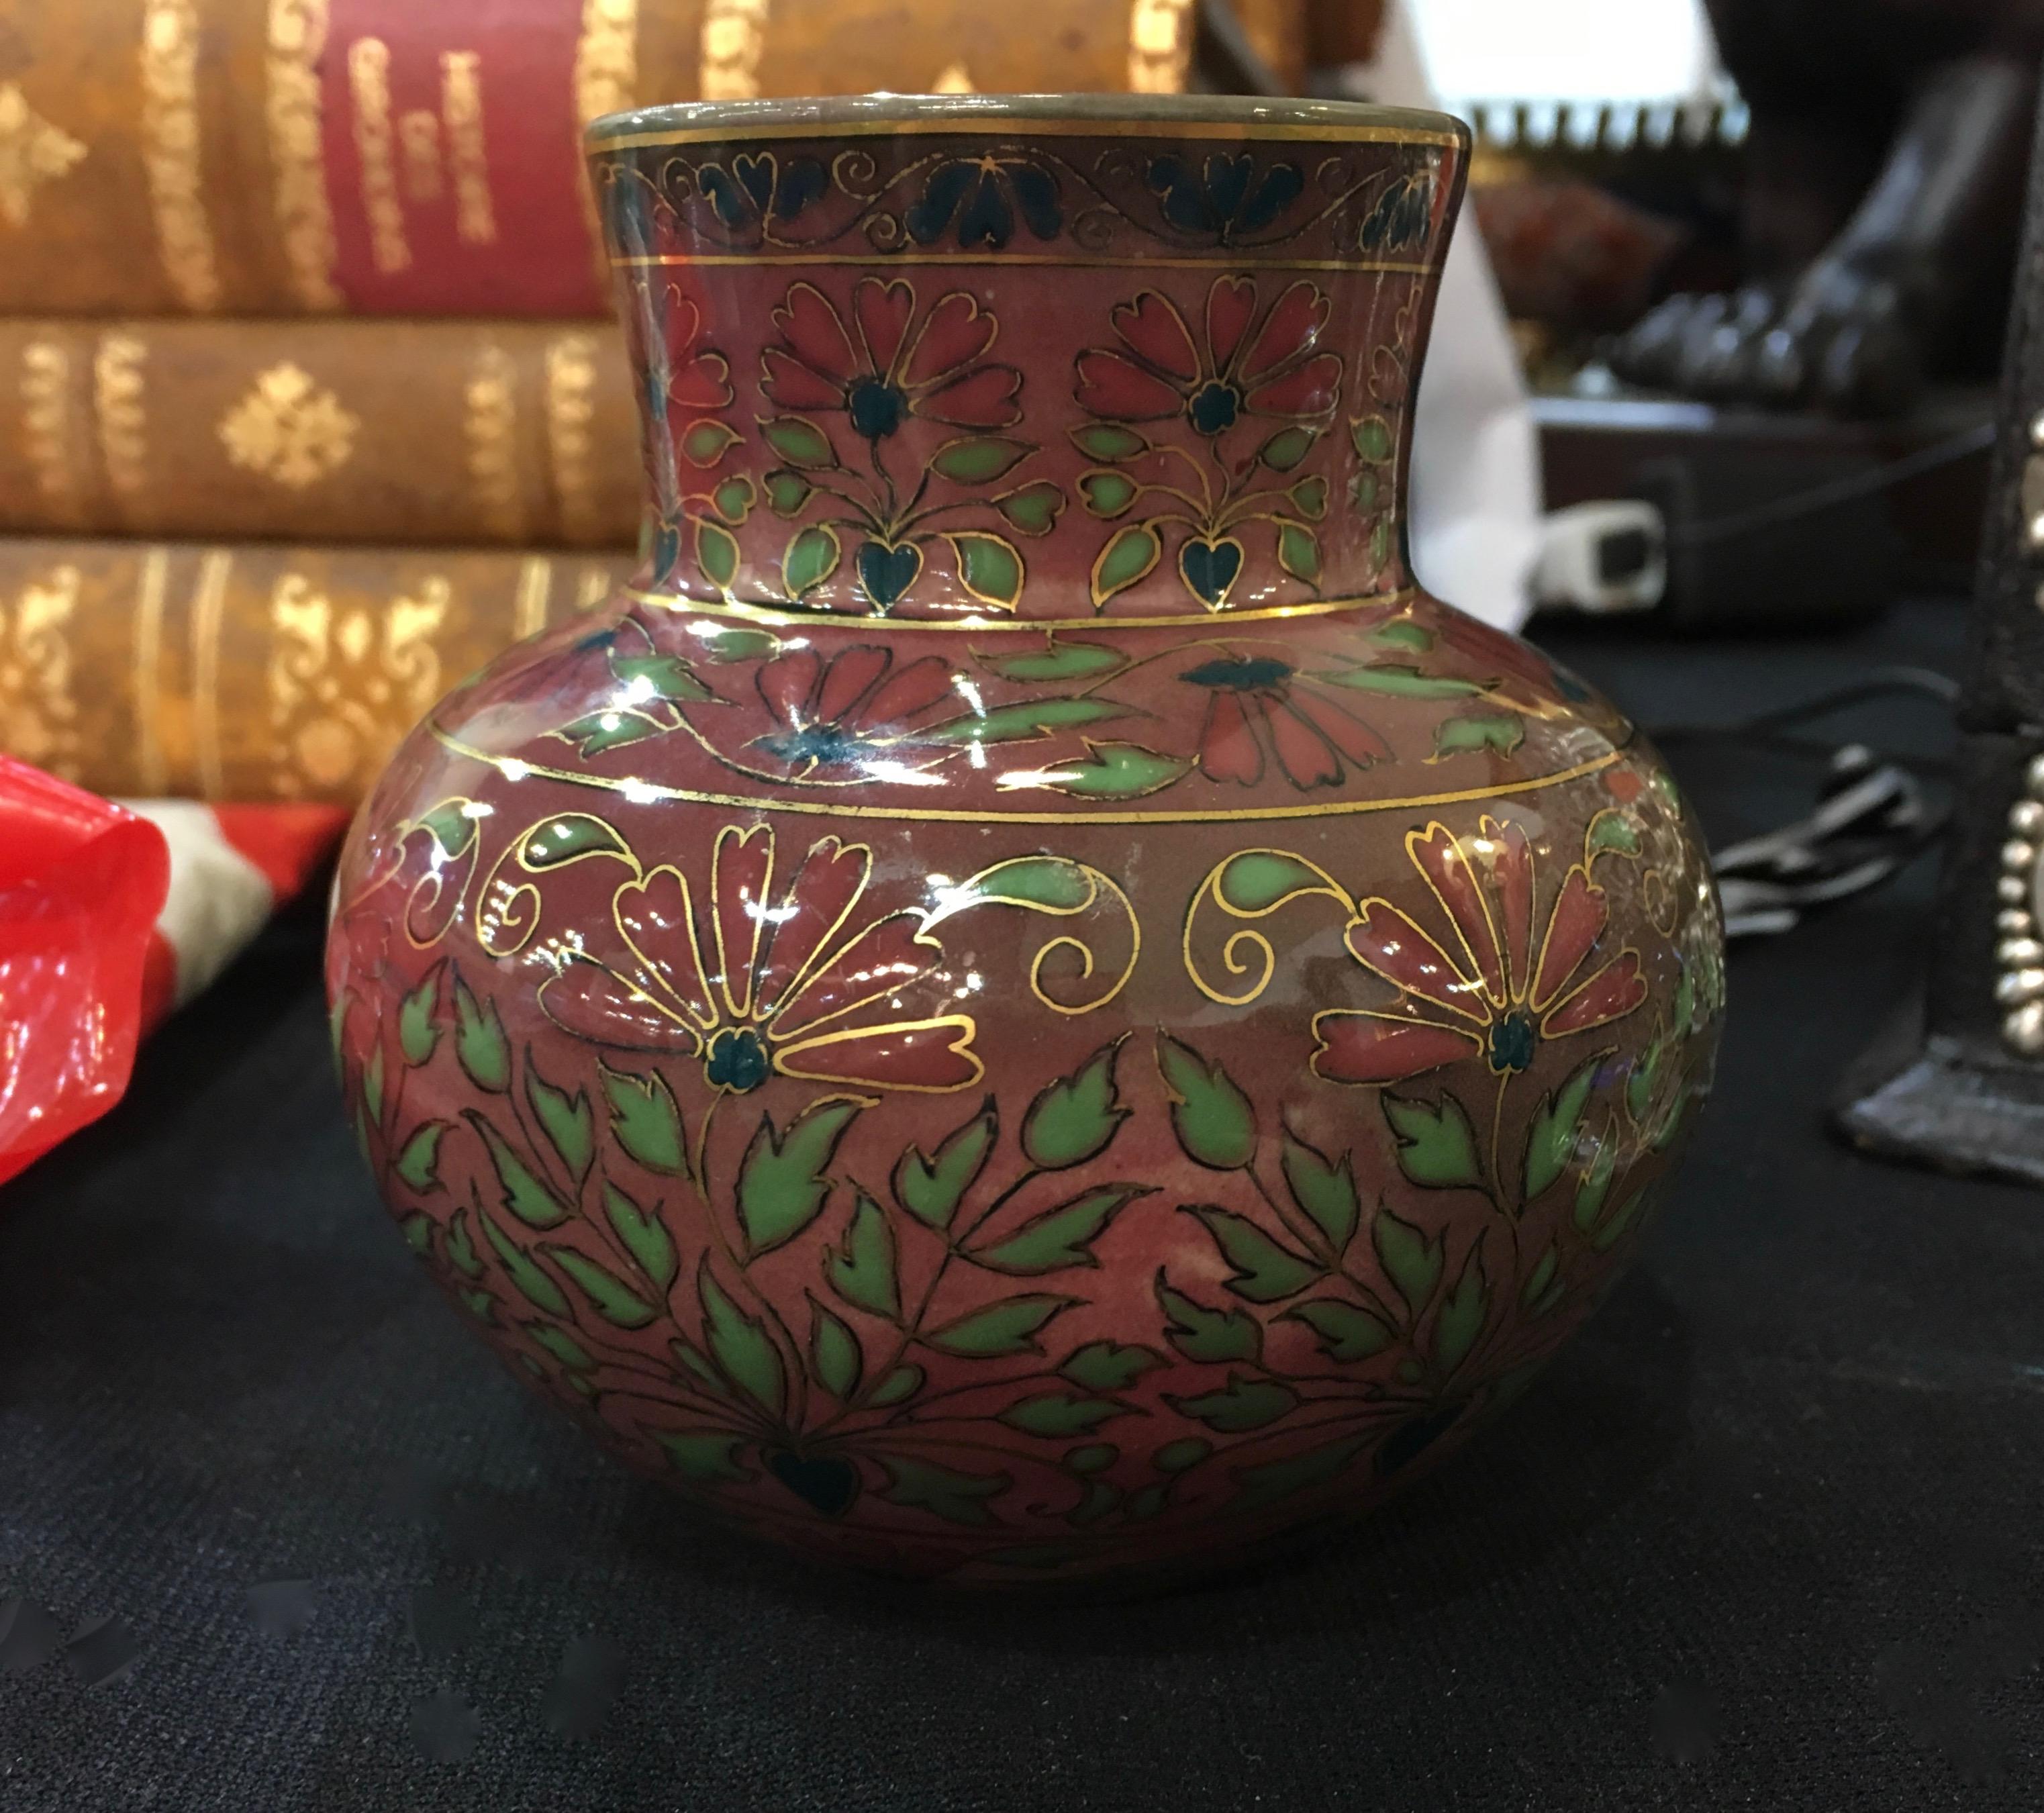 A diminutive 19th century cabinet vase in porcelain faience with hand-painted cloisonne-Style decor from Zsolnay Pecs of Hungary. The highly ornamental vessel is an early Zsolnay piece and a fine example of Victorian eclecticism, hand-decorated with